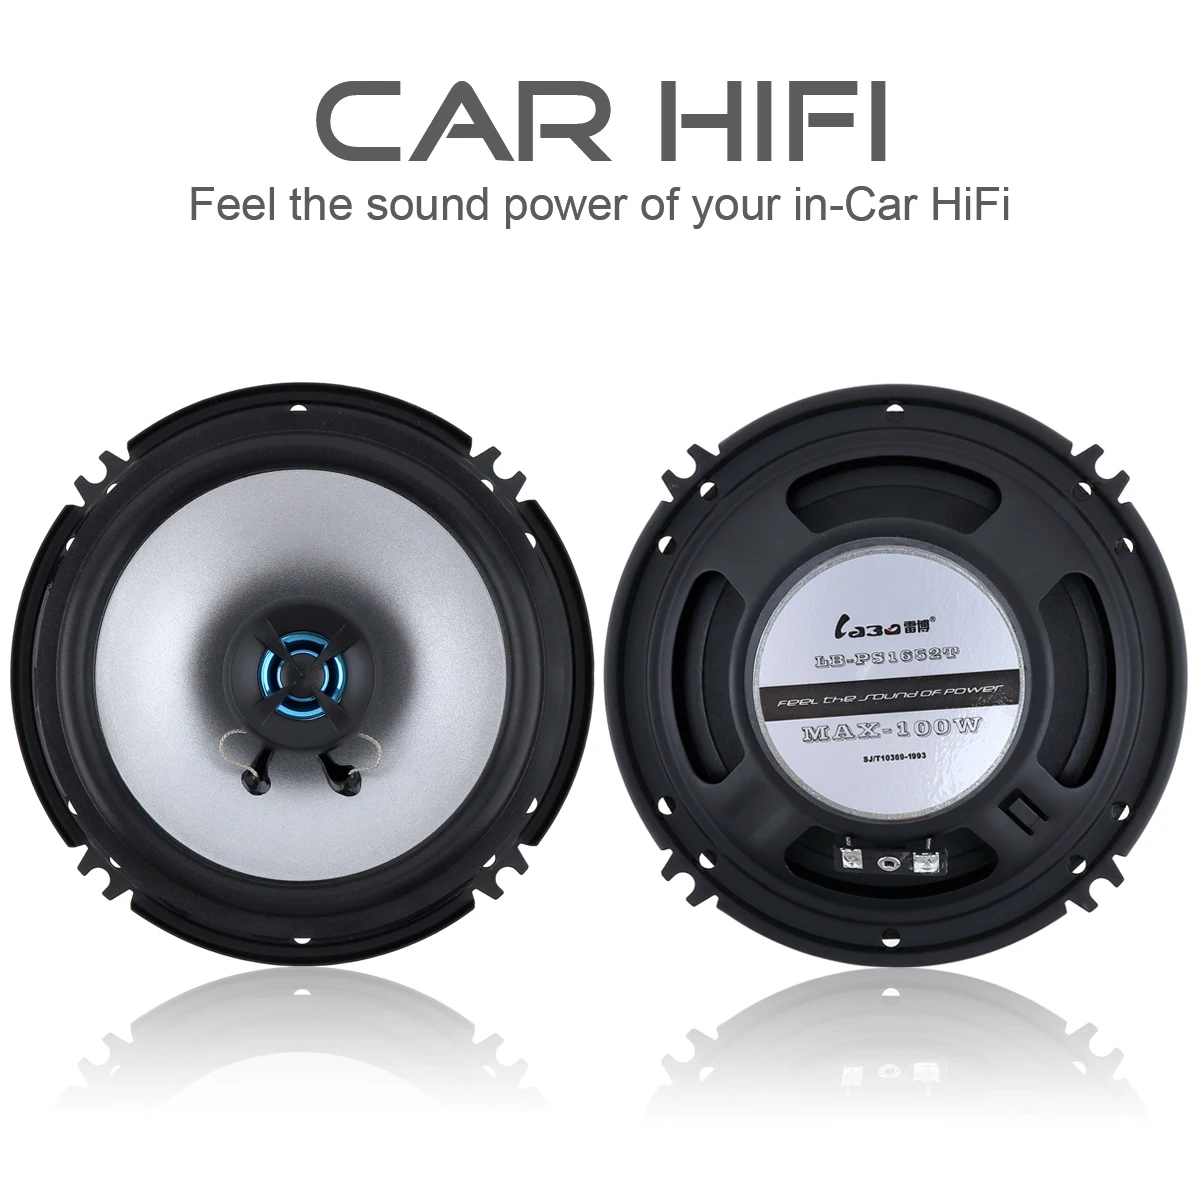 2pcs LB-PS1652T 100W 2 Way Car Coaxial Vehicle Door Auto Audio Music Stereo Full Range Frequency Hifi Speakers 2pcs professional 5 inch 60w 2 way car coaxial automobile car hifi full range frequency sensitivity power loudspeaker